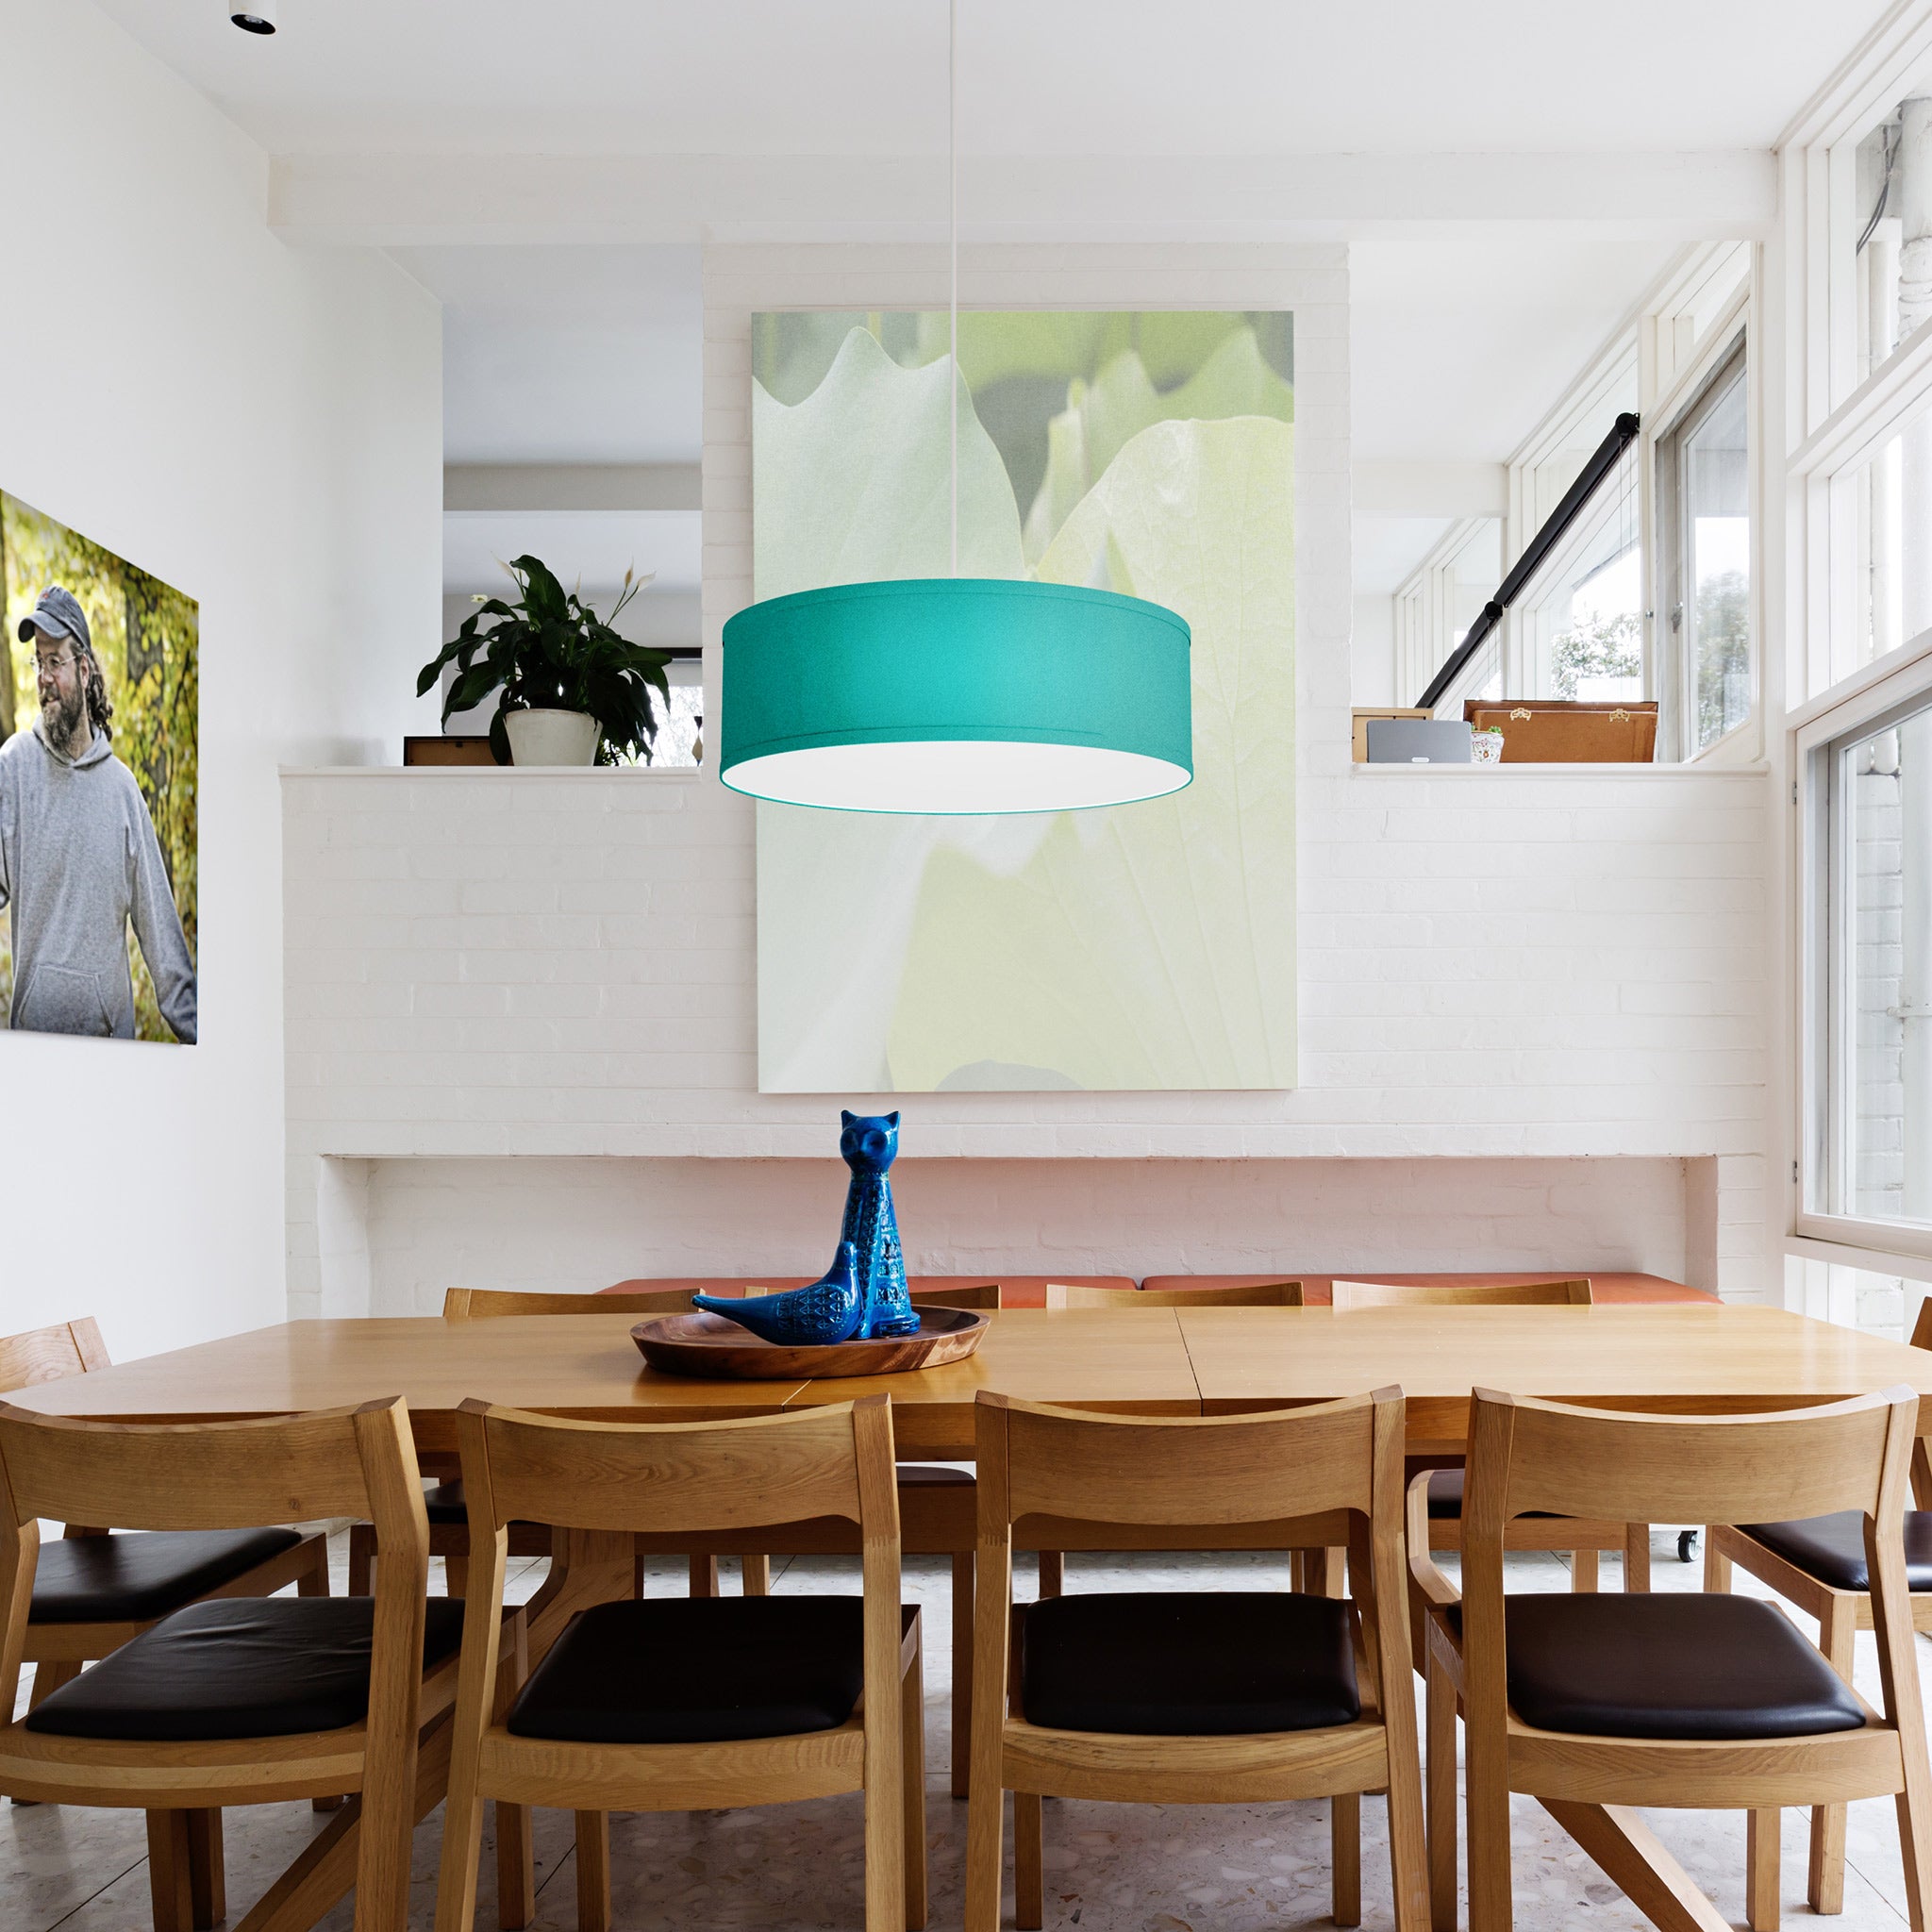 The Sheila Hanging Lamp from Seascape Fixtures in a dining room lifestyle photograph.